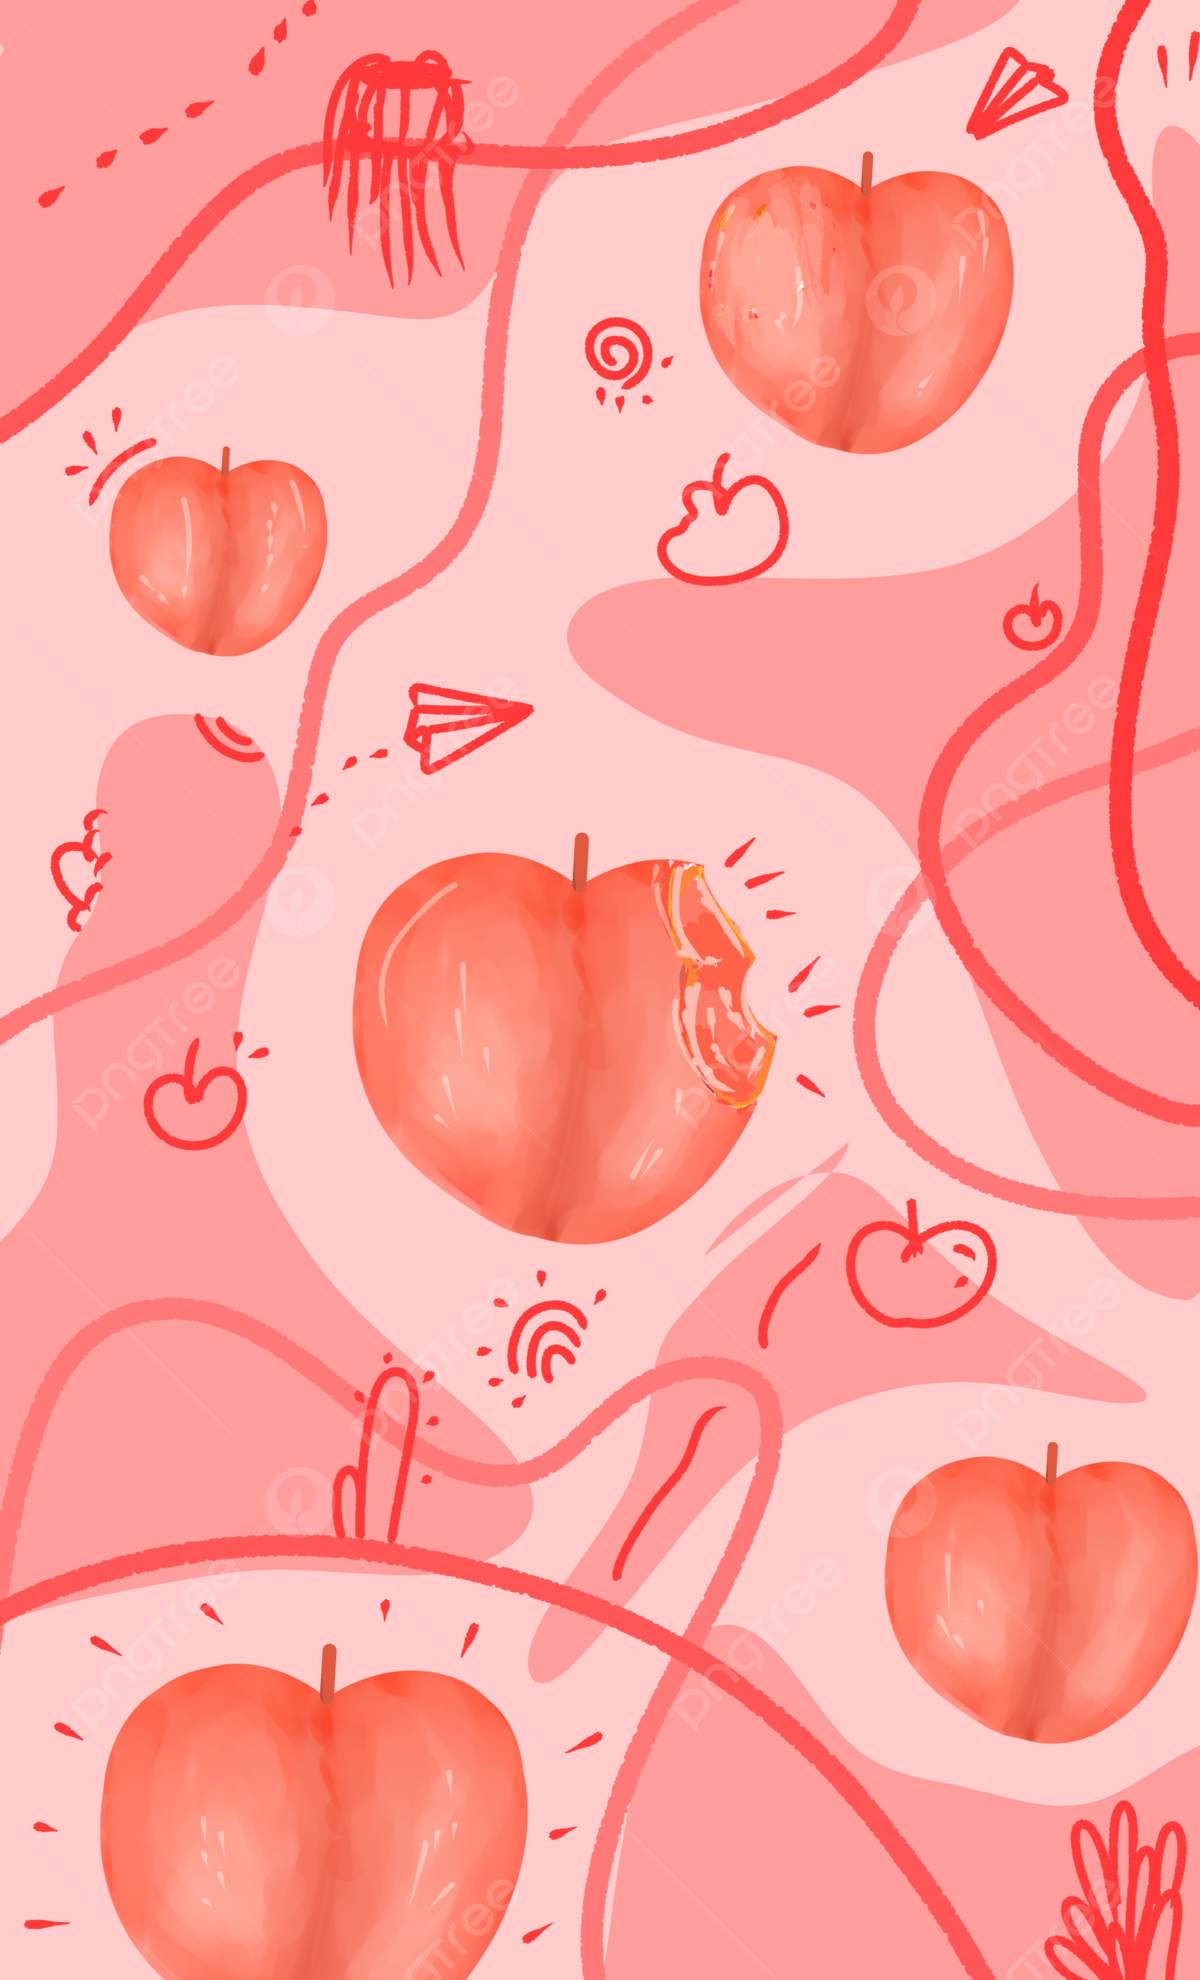 Wallpaper Peach Fruits Background Wallpaper Image For Free Download